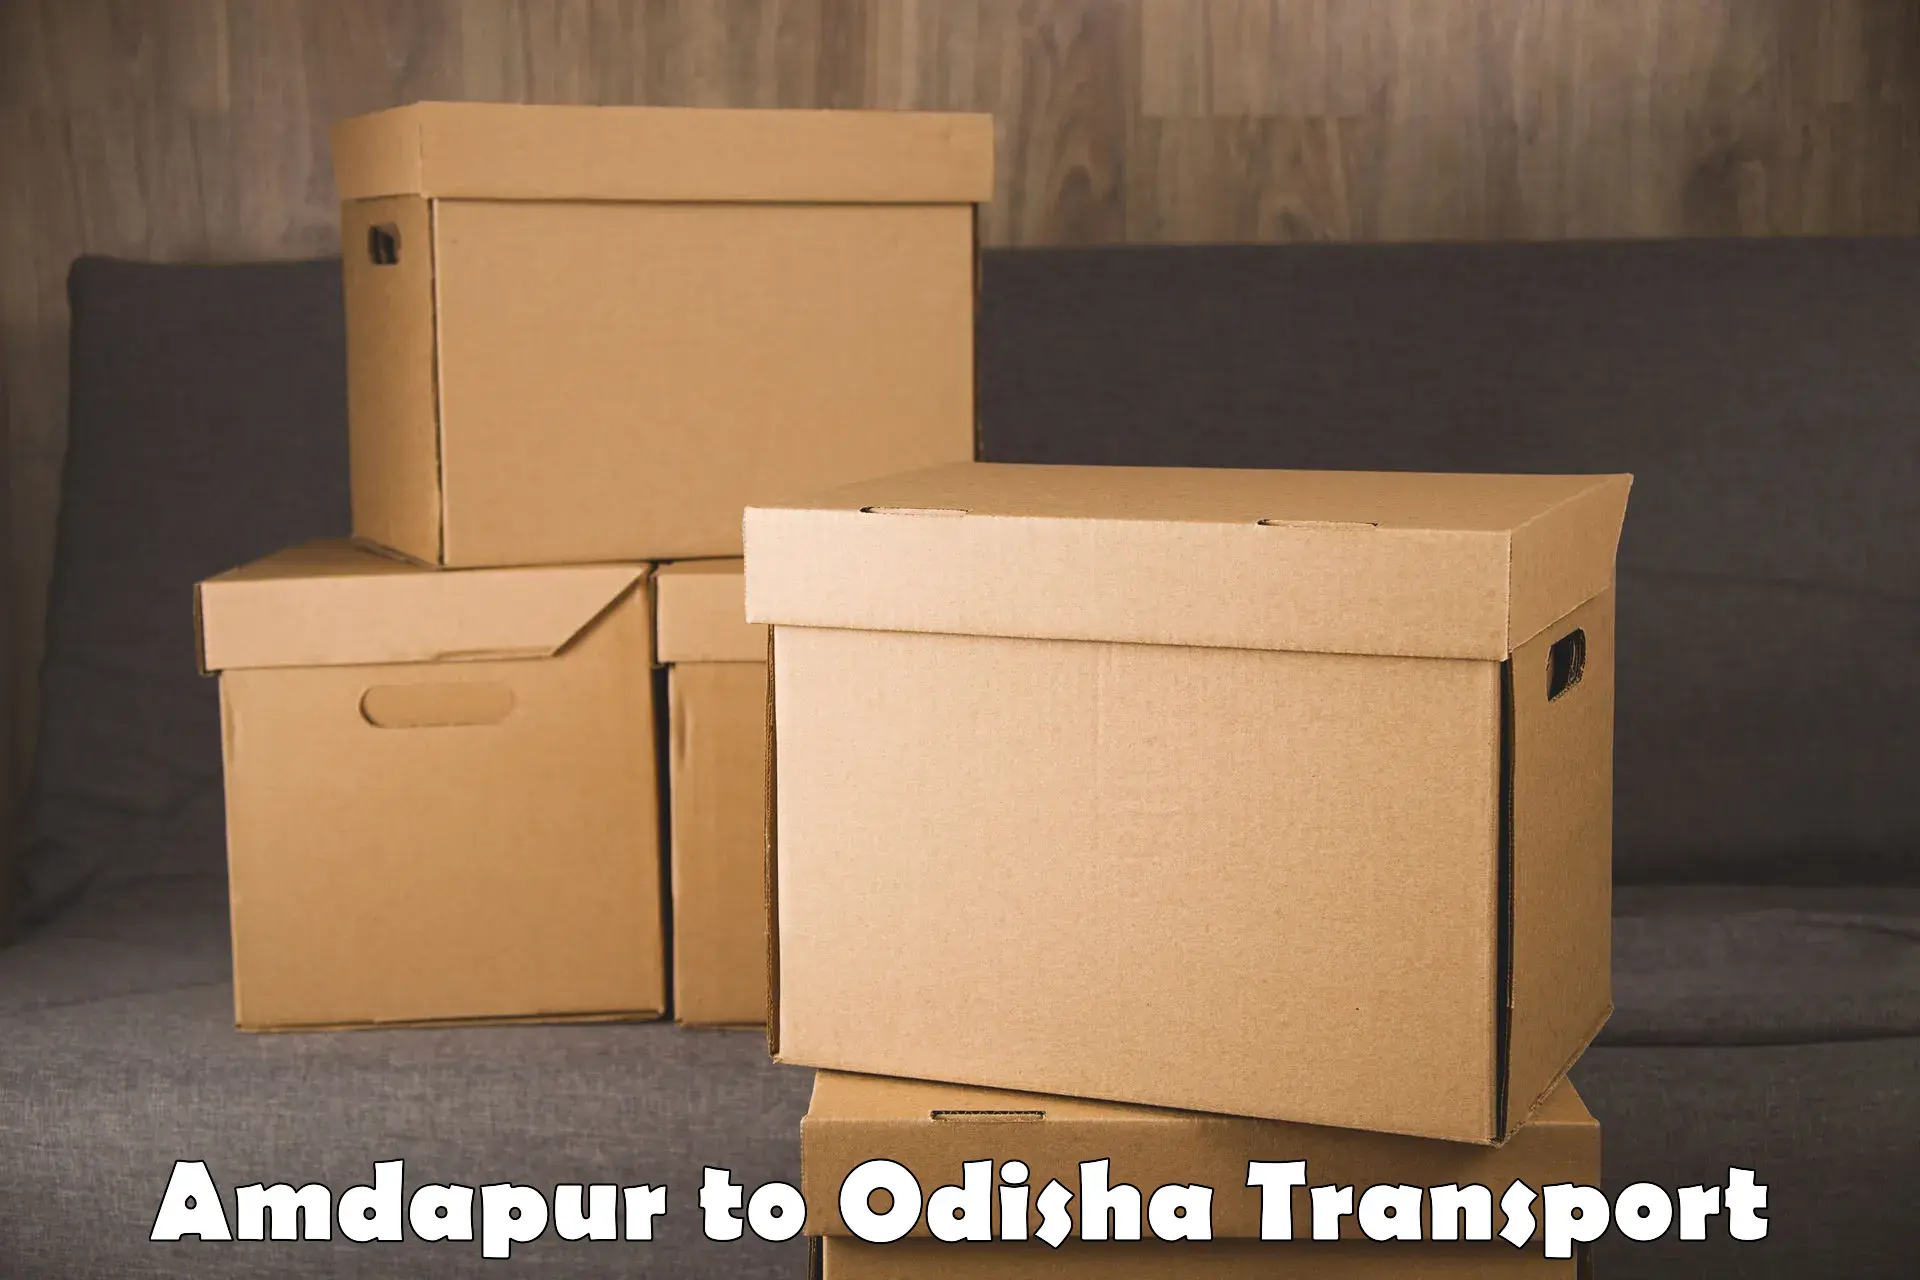 Container transport service Amdapur to Kendujhar